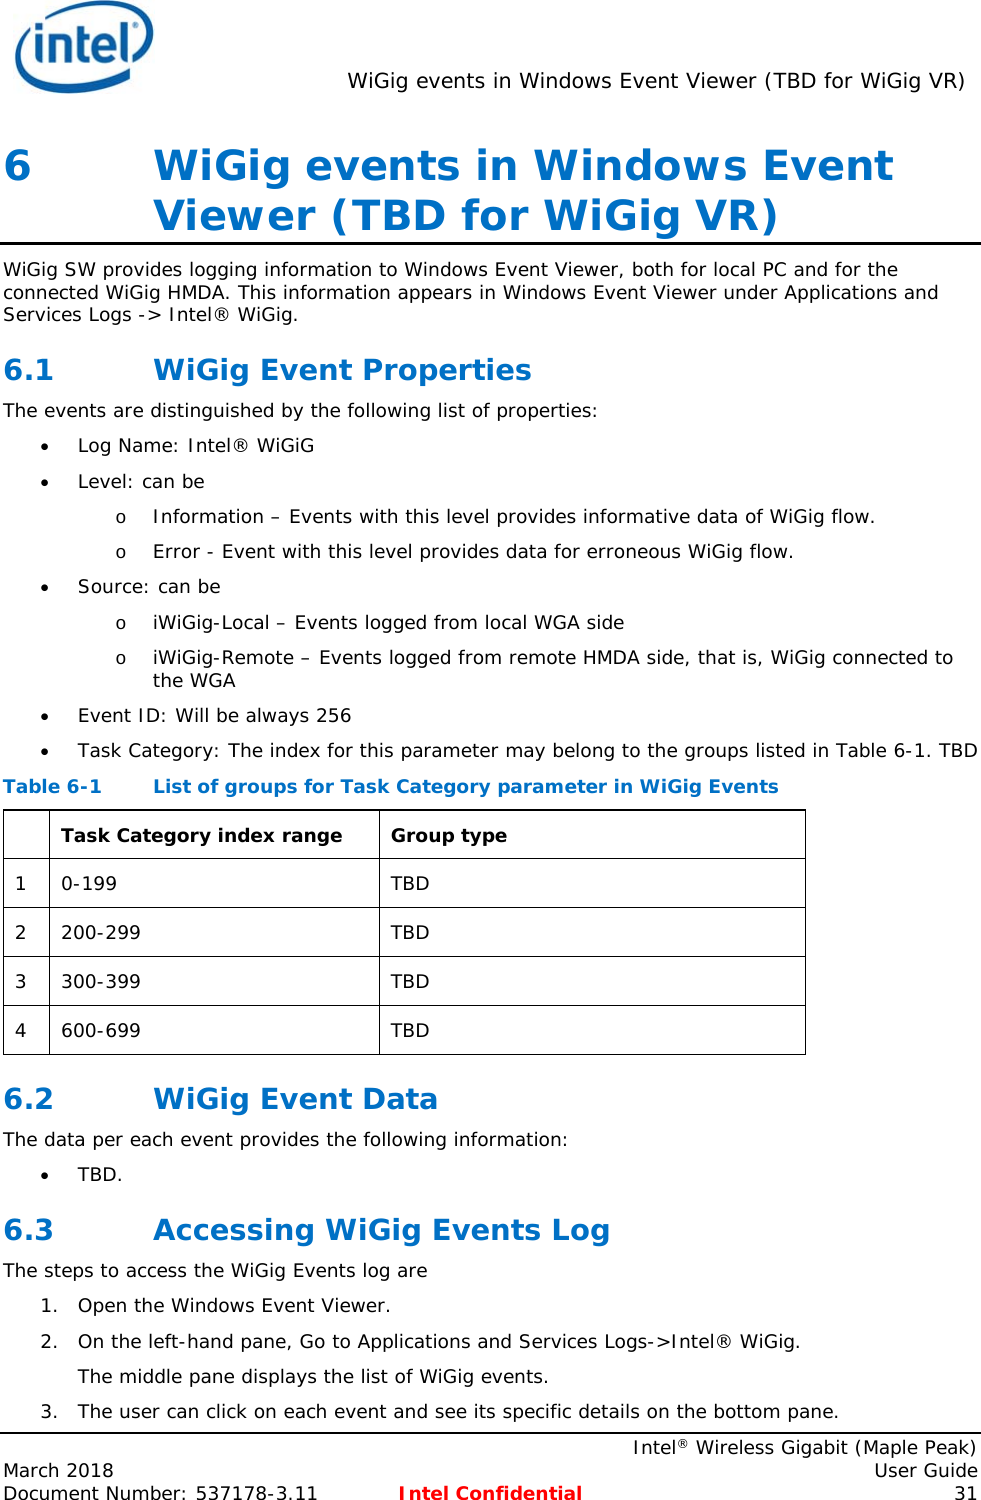  WiGig events in Windows Event Viewer (TBD for WiGig VR)    Intel® Wireless Gigabit (Maple Peak) March 2018    User Guide Document Number: 537178-3.11  Intel Confidential 31 6   WiGig events in Windows Event Viewer (TBD for WiGig VR) WiGig SW provides logging information to Windows Event Viewer, both for local PC and for the connected WiGig HMDA. This information appears in Windows Event Viewer under Applications and Services Logs -&gt; Intel® WiGig. 6.1 WiGig Event Properties The events are distinguished by the following list of properties:  Log Name: Intel® WiGiG  Level: can be o Information – Events with this level provides informative data of WiGig flow. o Error - Event with this level provides data for erroneous WiGig flow.  Source: can be o iWiGig-Local – Events logged from local WGA side o iWiGig-Remote – Events logged from remote HMDA side, that is, WiGig connected to the WGA  Event ID: Will be always 256  Task Category: The index for this parameter may belong to the groups listed in Table 6-1. TBD Table 6-1  List of groups for Task Category parameter in WiGig Events  Task Category index range  Group type 1 0-199  TBD 2 200-299  TBD 3 300-399  TBD 4 600-699  TBD 6.2 WiGig Event Data The data per each event provides the following information:  TBD. 6.3 Accessing WiGig Events Log The steps to access the WiGig Events log are 1. Open the Windows Event Viewer. 2. On the left-hand pane, Go to Applications and Services Logs-&gt;Intel® WiGig. The middle pane displays the list of WiGig events. 3. The user can click on each event and see its specific details on the bottom pane. 